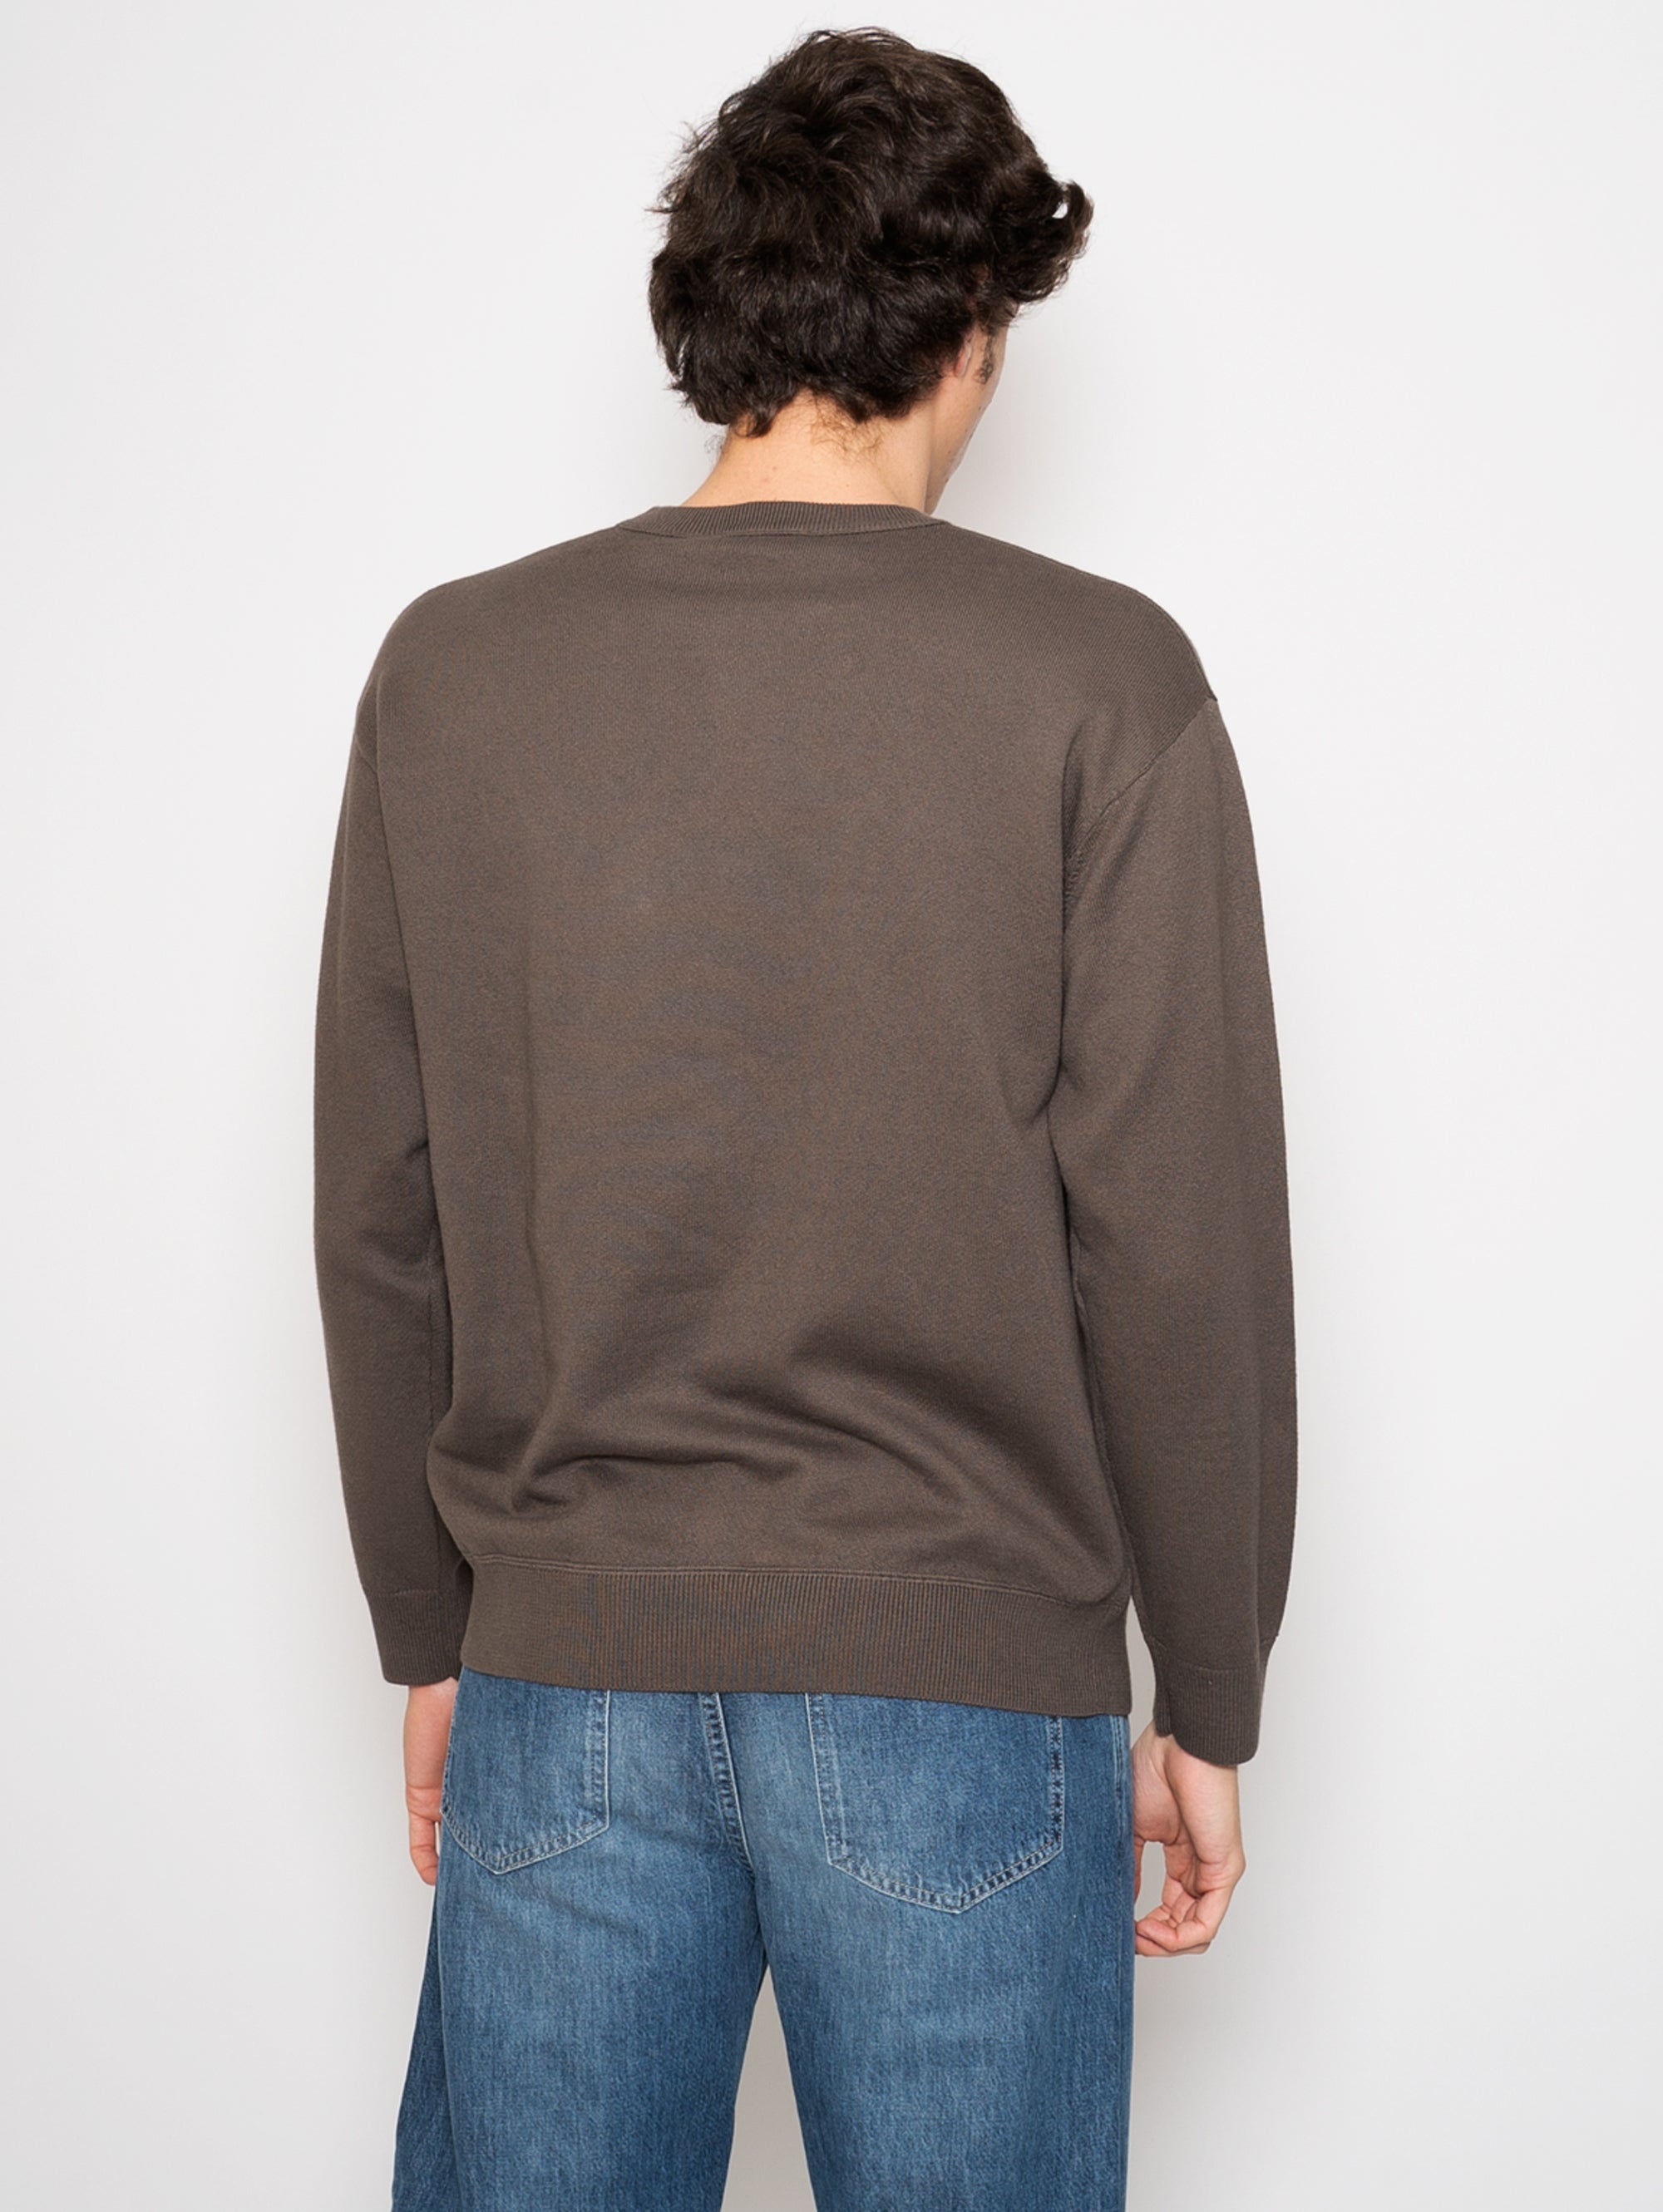 Sweater with Gray V-Insert